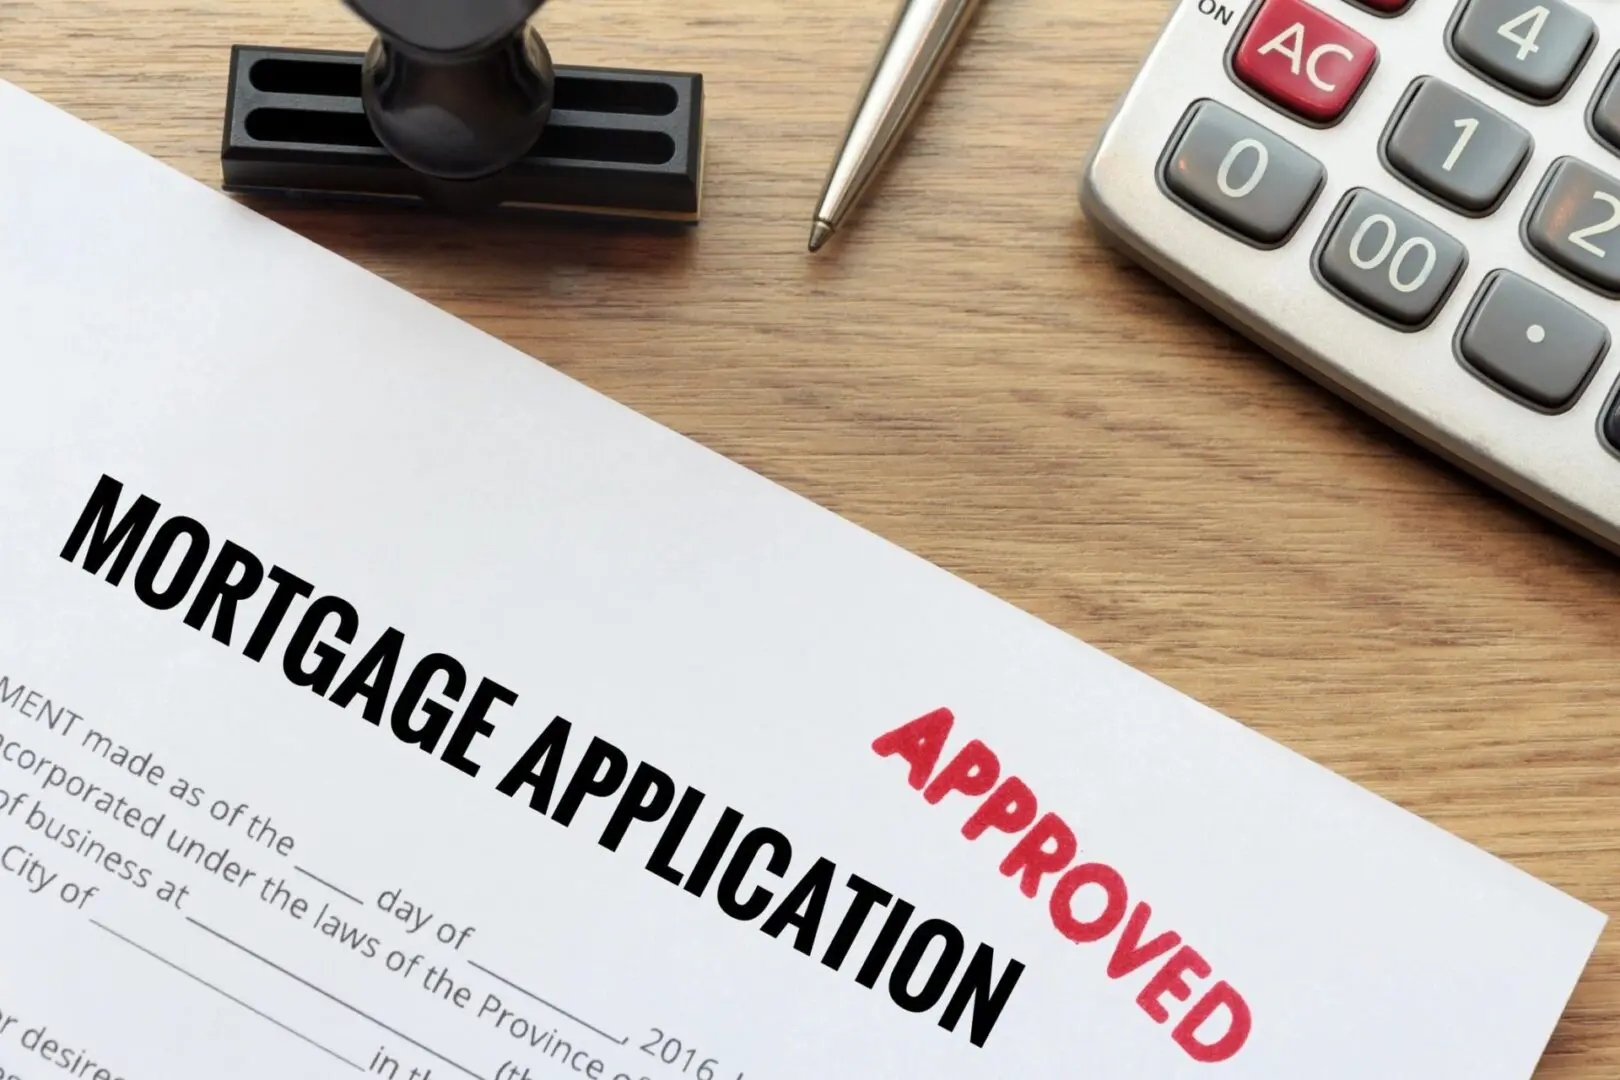 Approved Mortgage application form, lay down on wooden desk with pen and calculator